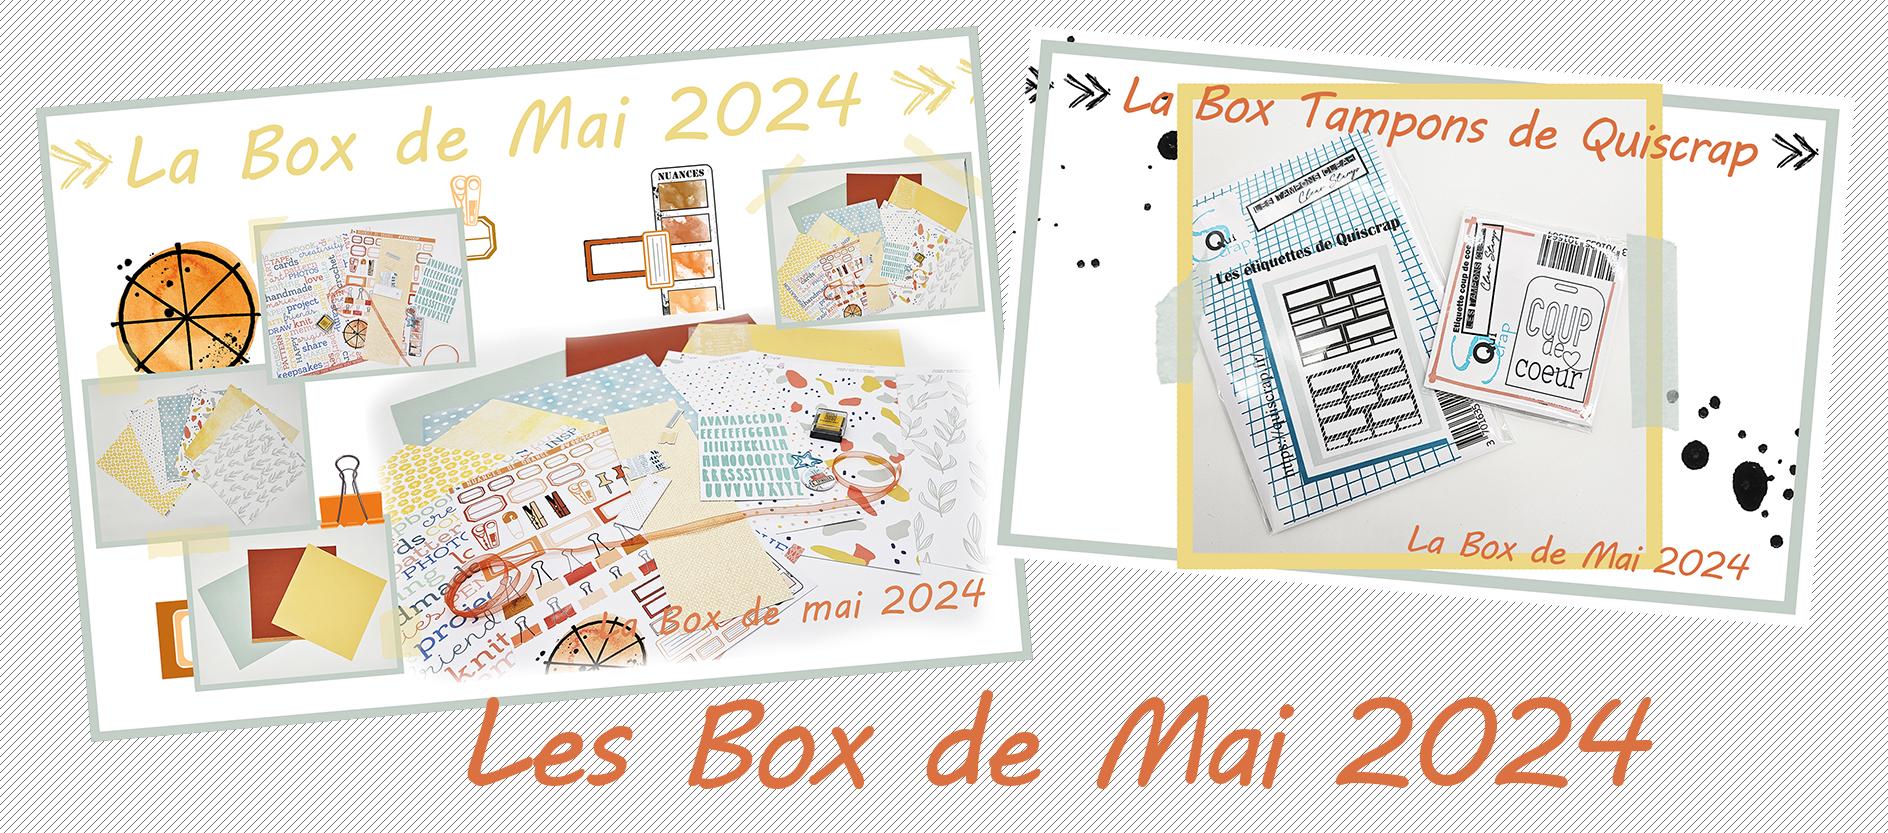 You are currently viewing Les Box de Mai 2024